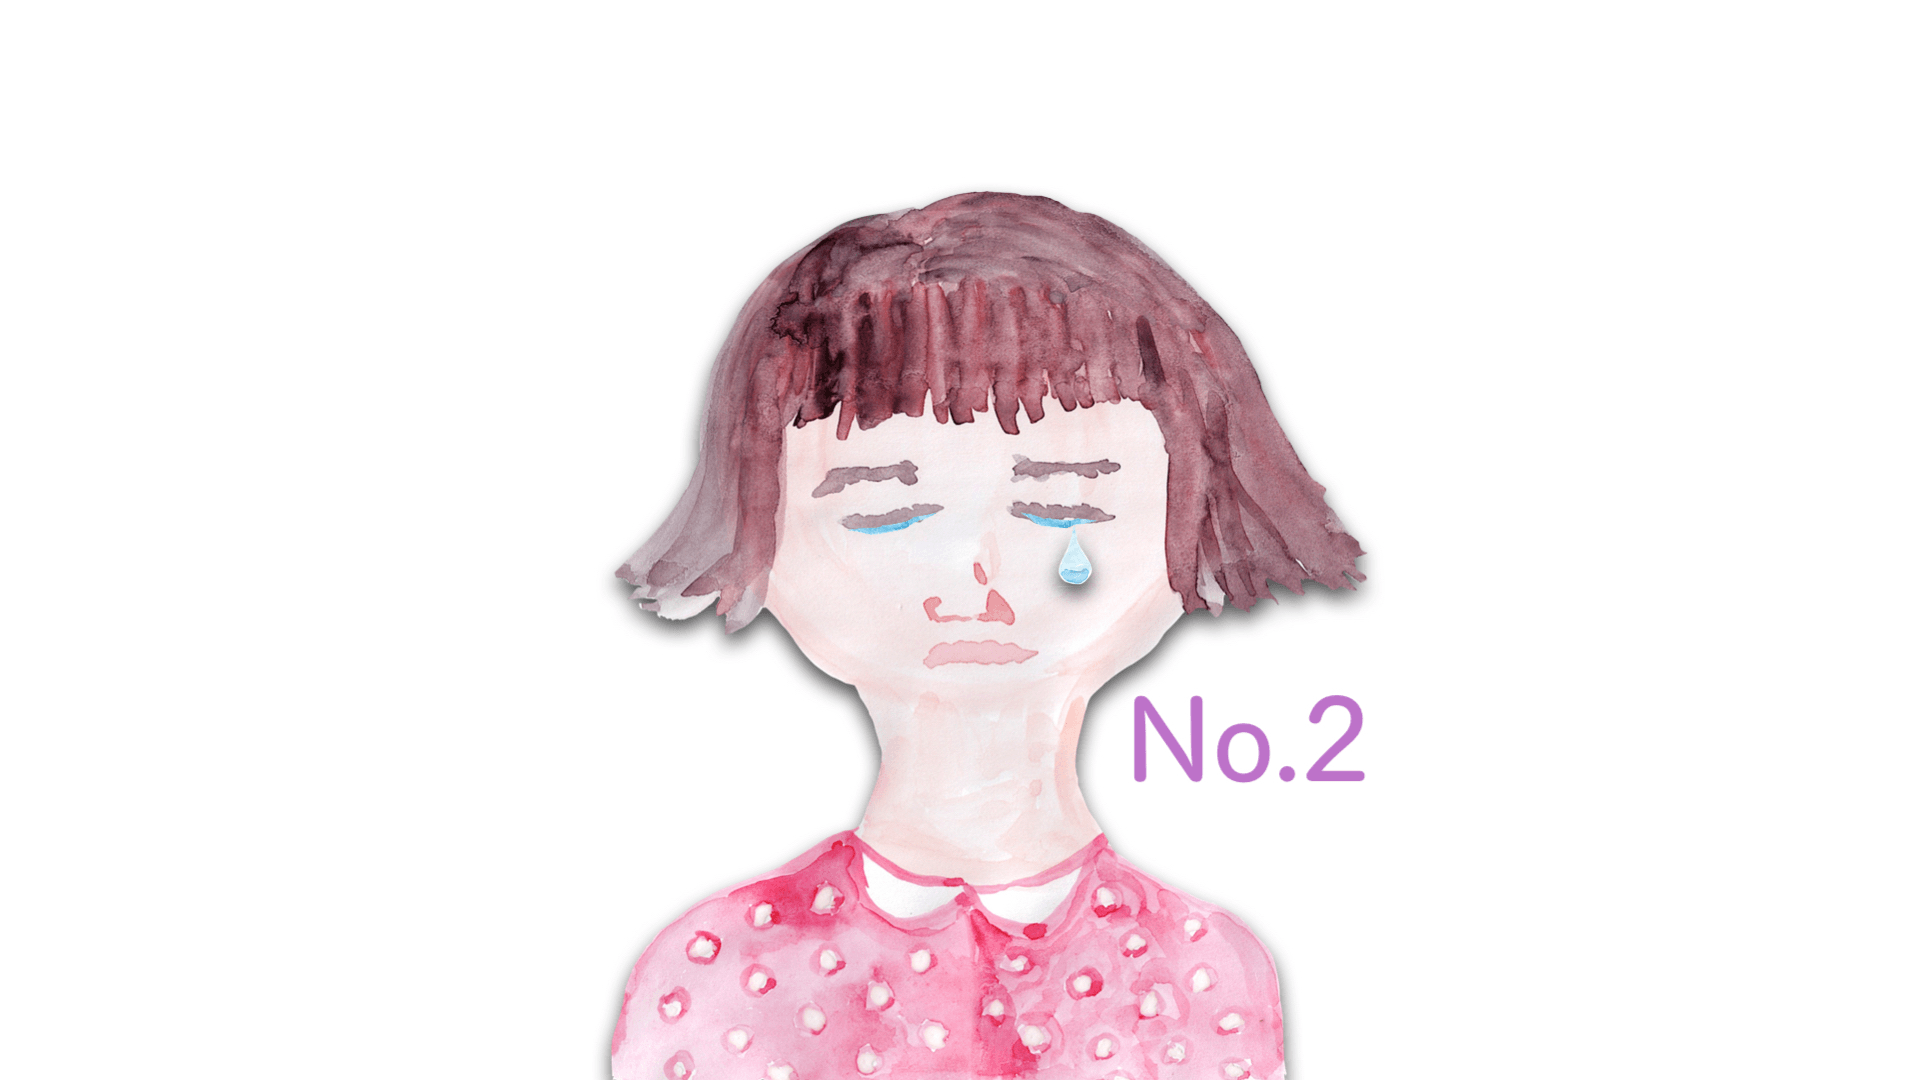 No.2 Tears (Mallets Layer of DAW and moving watercolor painting) in Japan